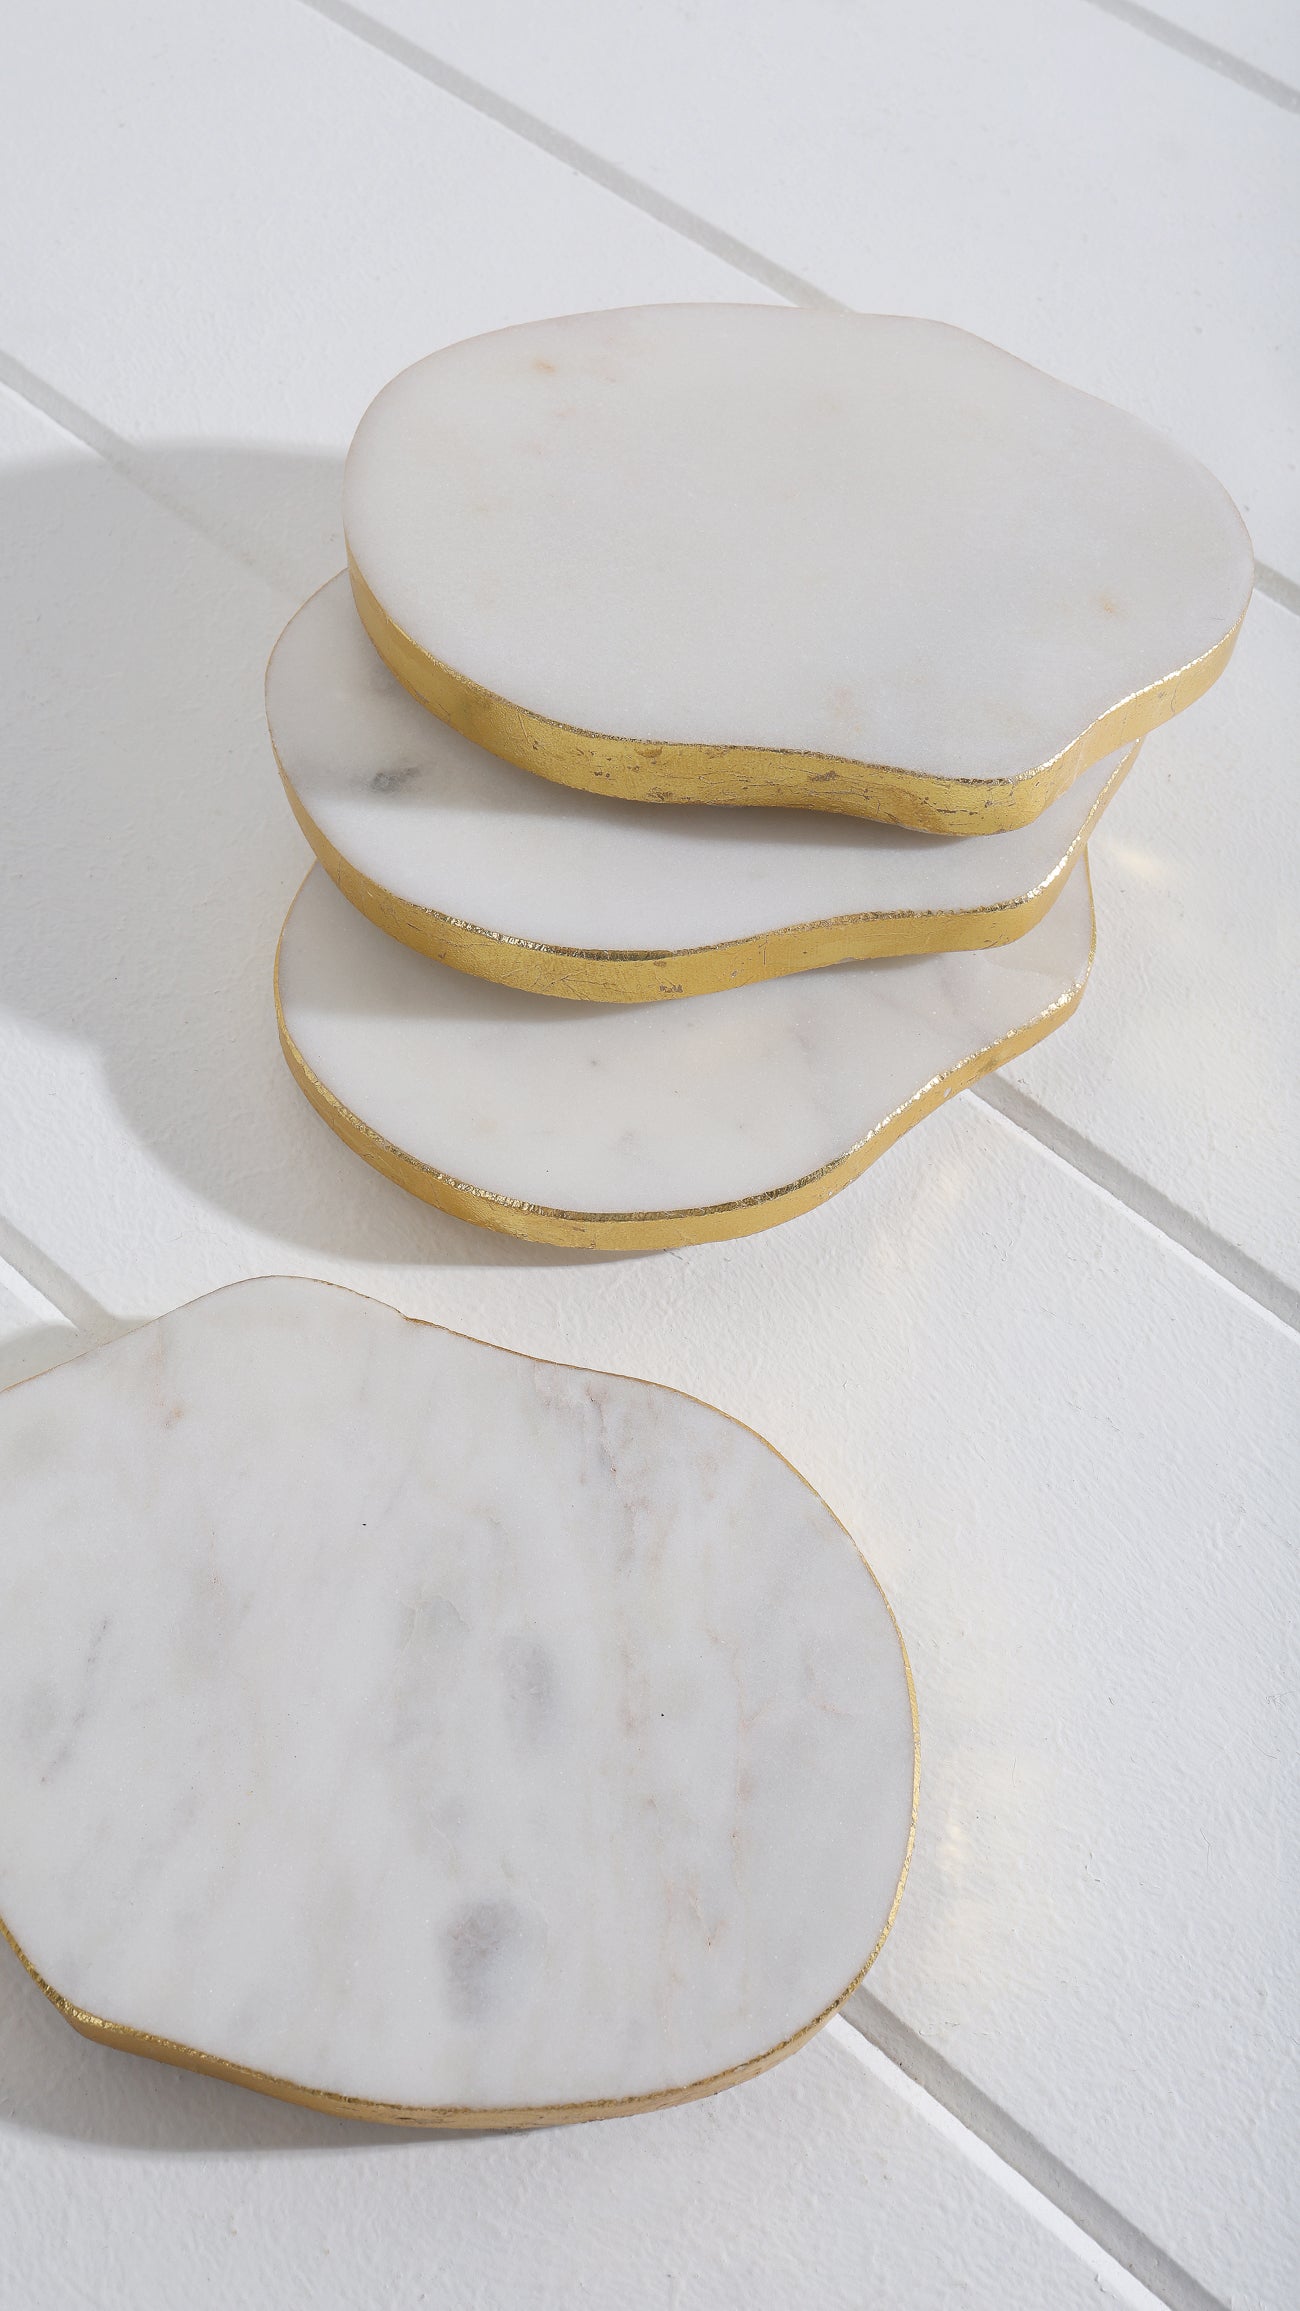 WENDELL MARBLE SET OF 4 COASTERS WITH GOLD FOIL